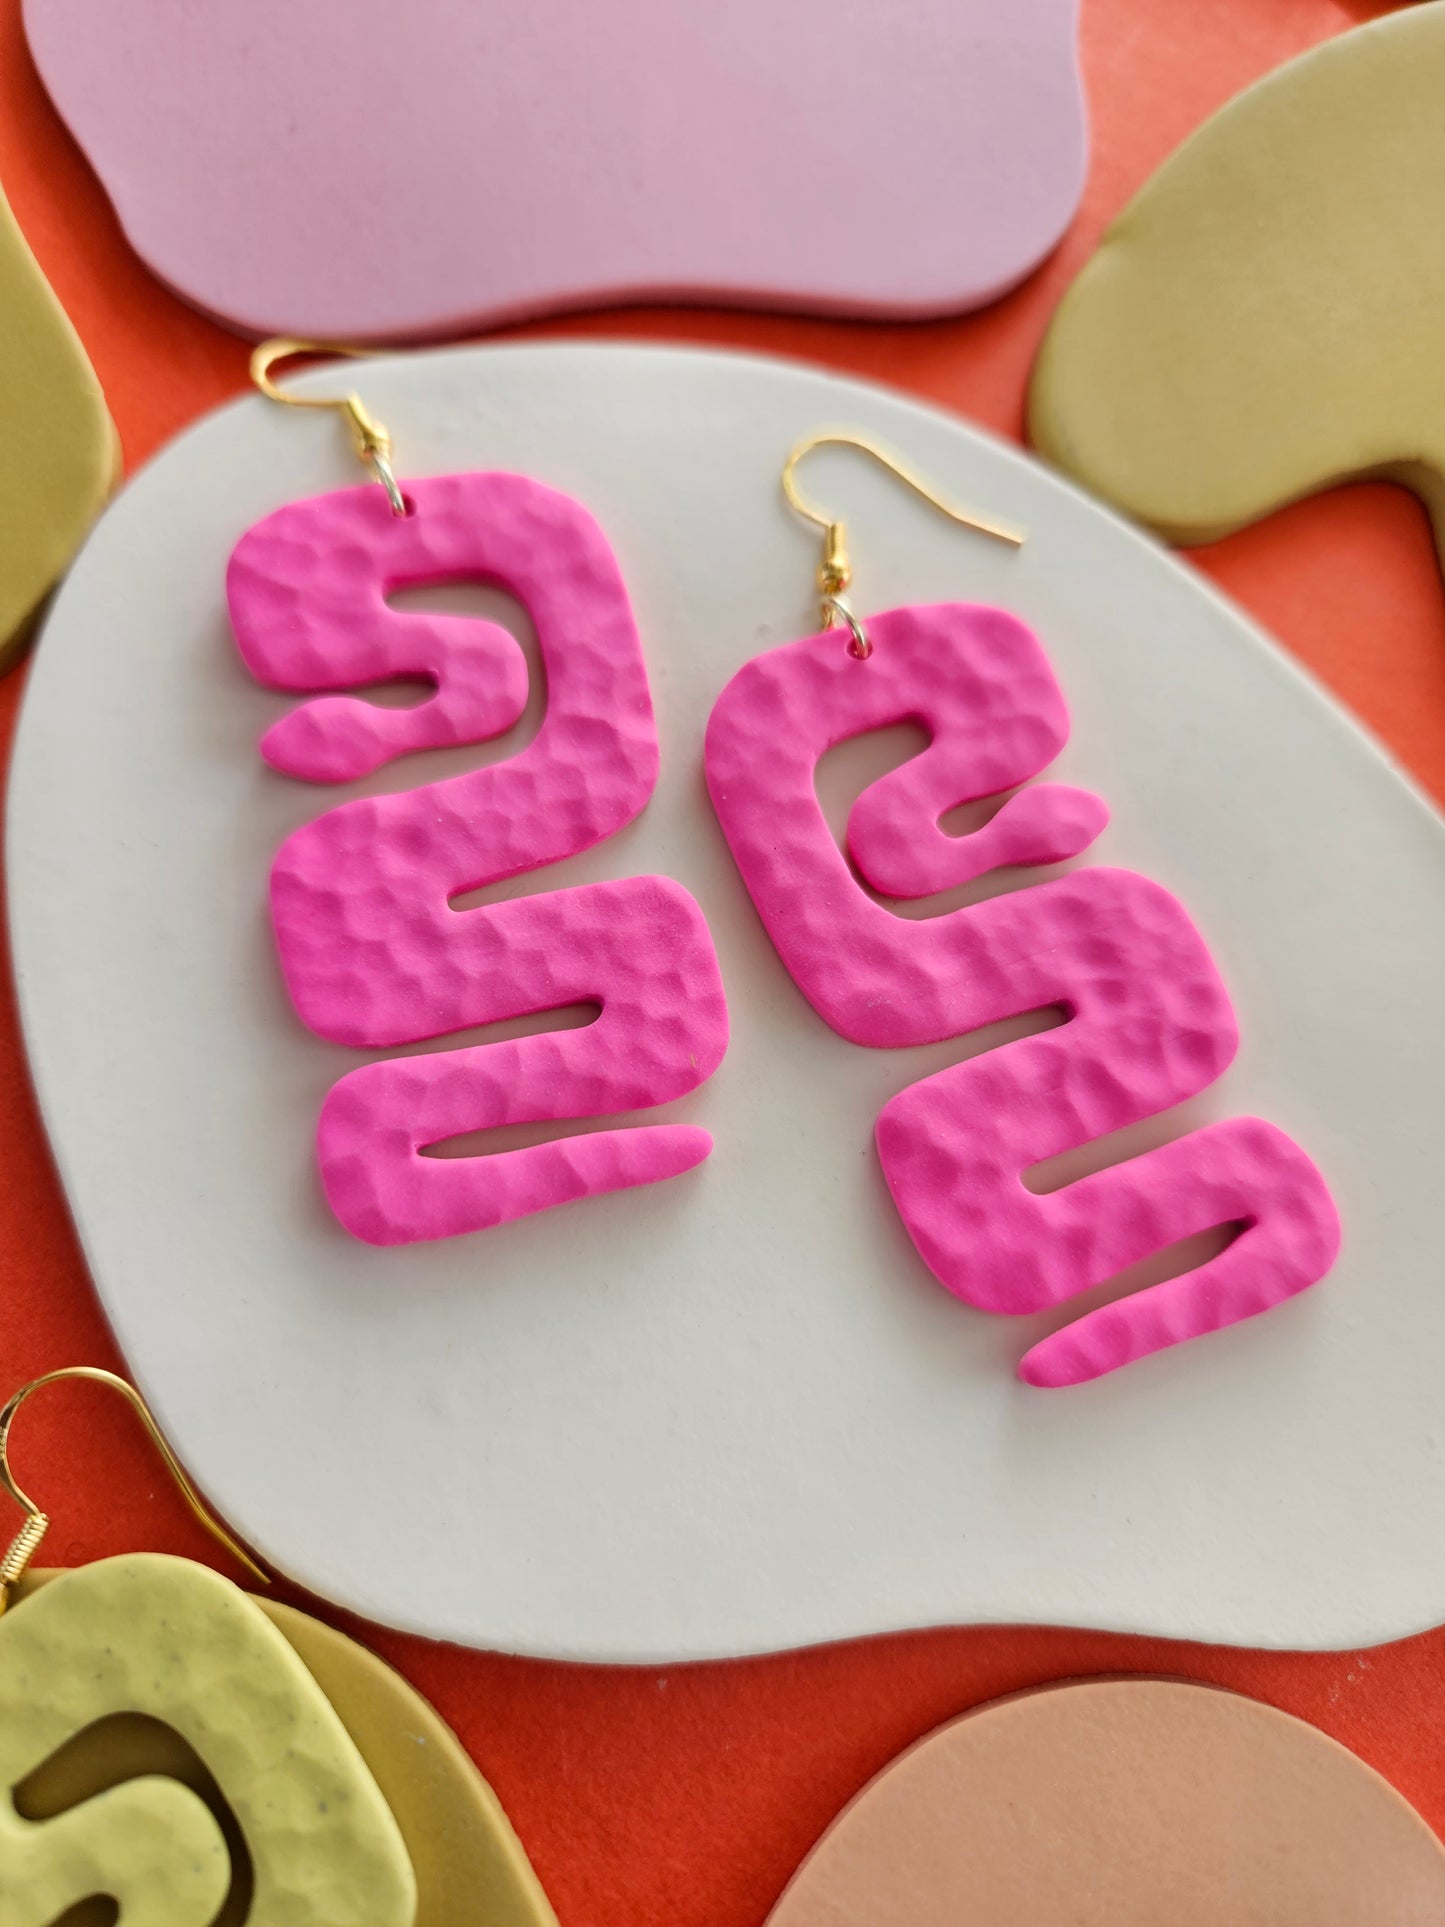 Oversized Snake Earrings in LMT ED Colors Pink + Speckled Pear Polymer Clay Earrings